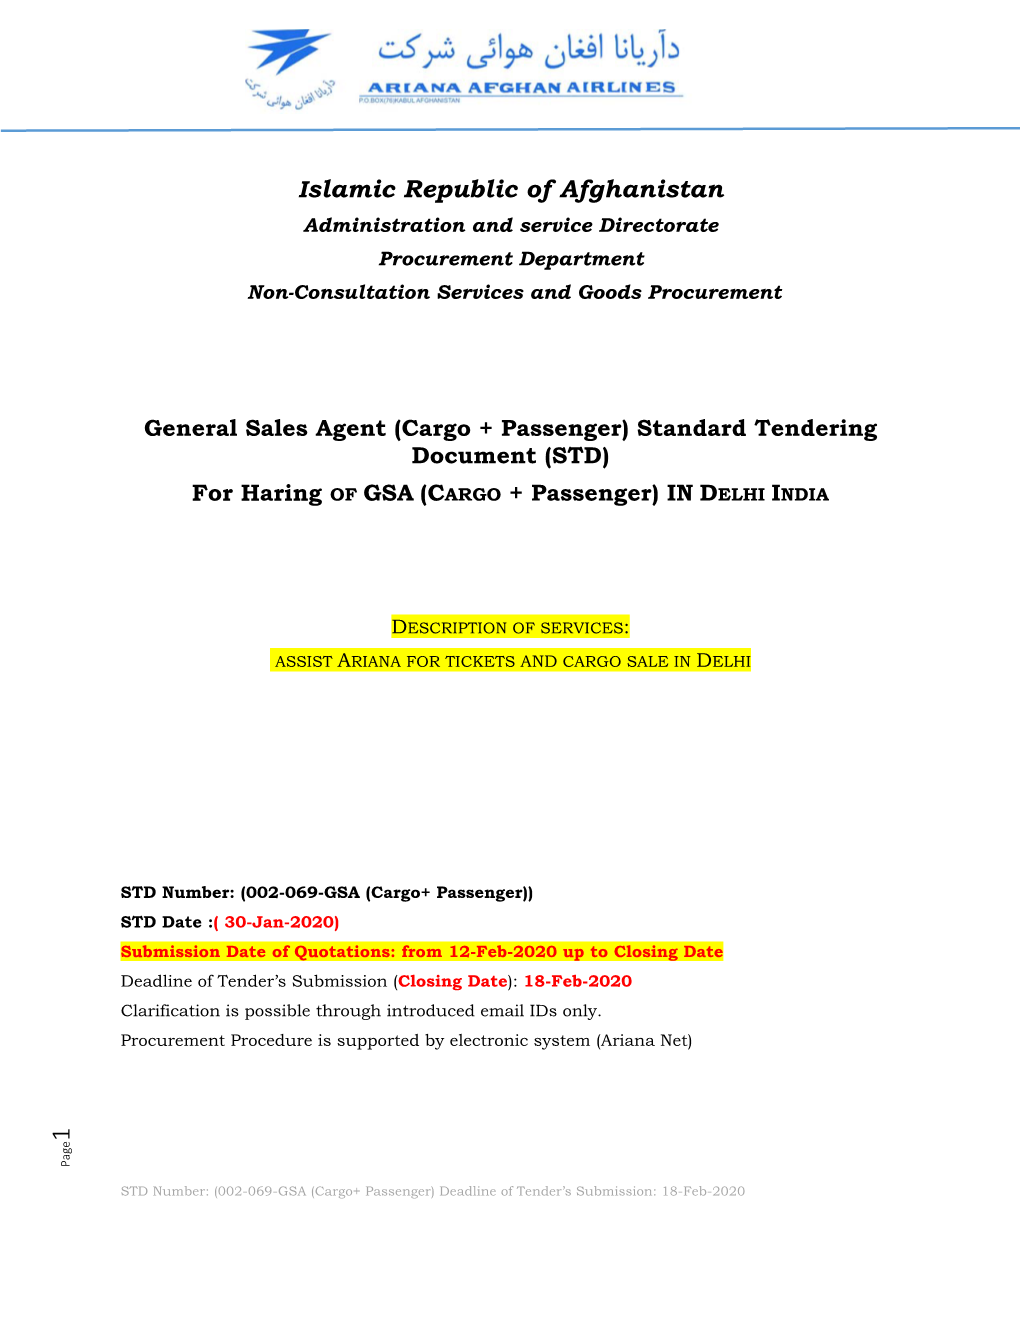 Islamic Republic of Afghanistan Administration and Service Directorate Procurement Department Non-Consultation Services and Goods Procurement